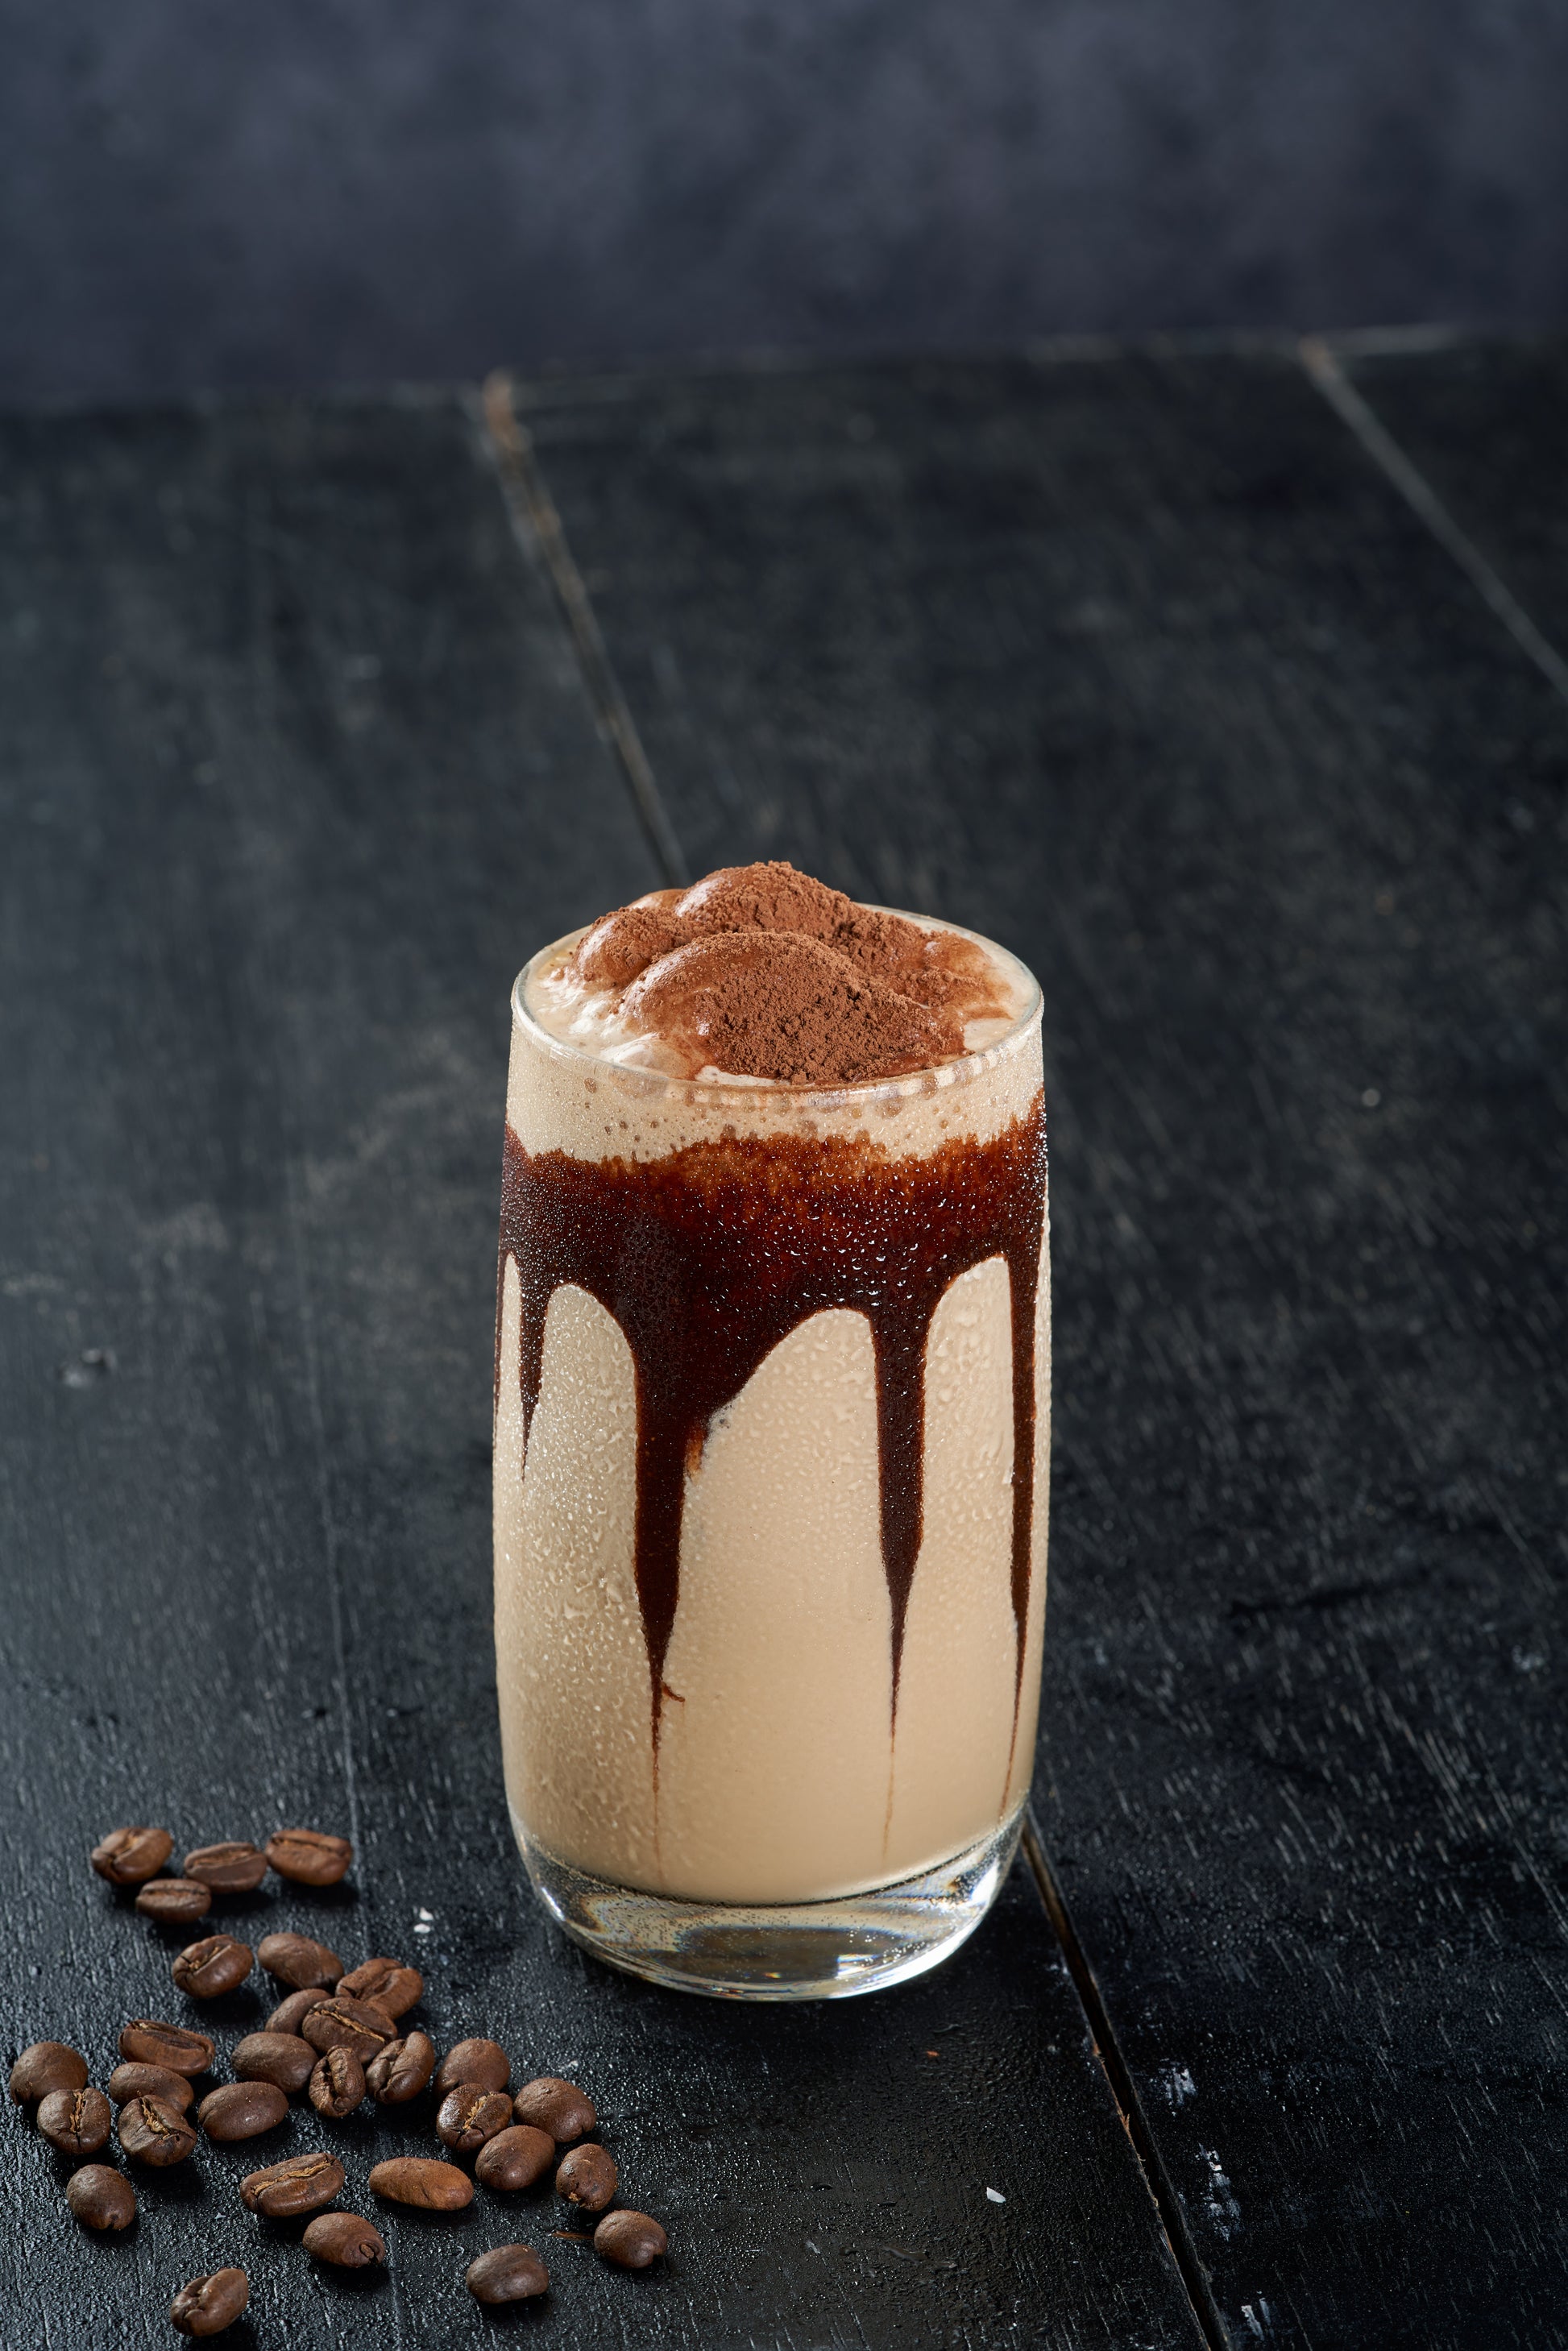 A refreshing glass of Indian Cold Coffee, a traditional Indian beverage made with coffee, milk, and spices